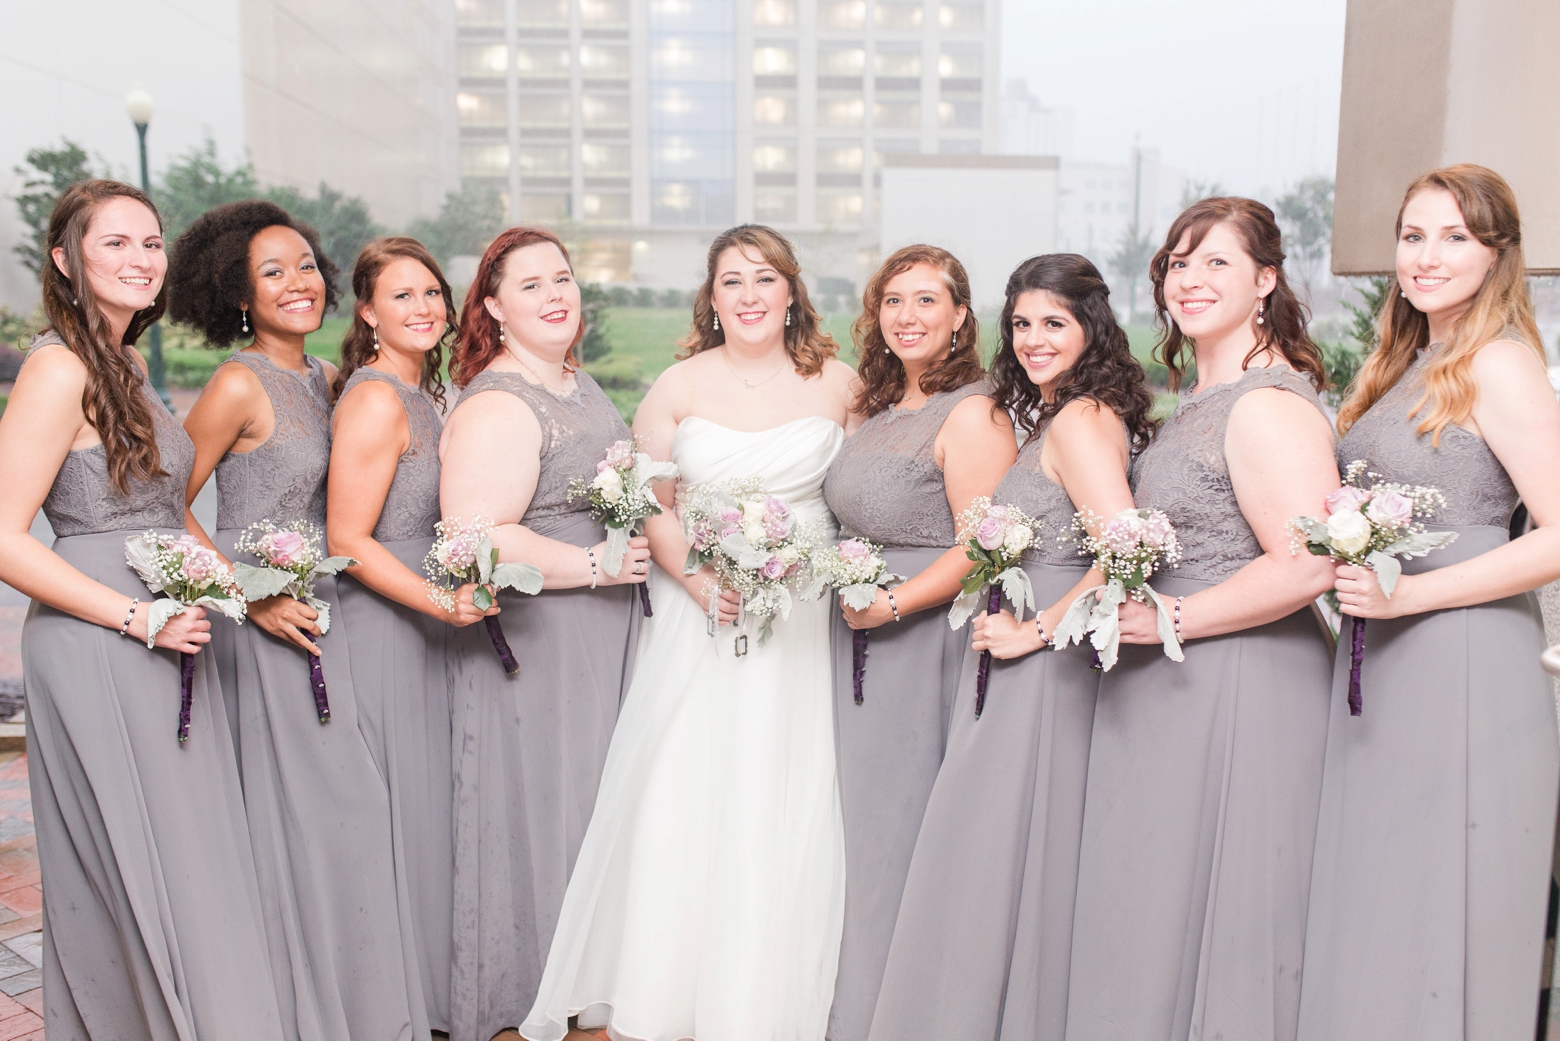 Virginia Arts Festival Wedding by Angie McPherson Photography